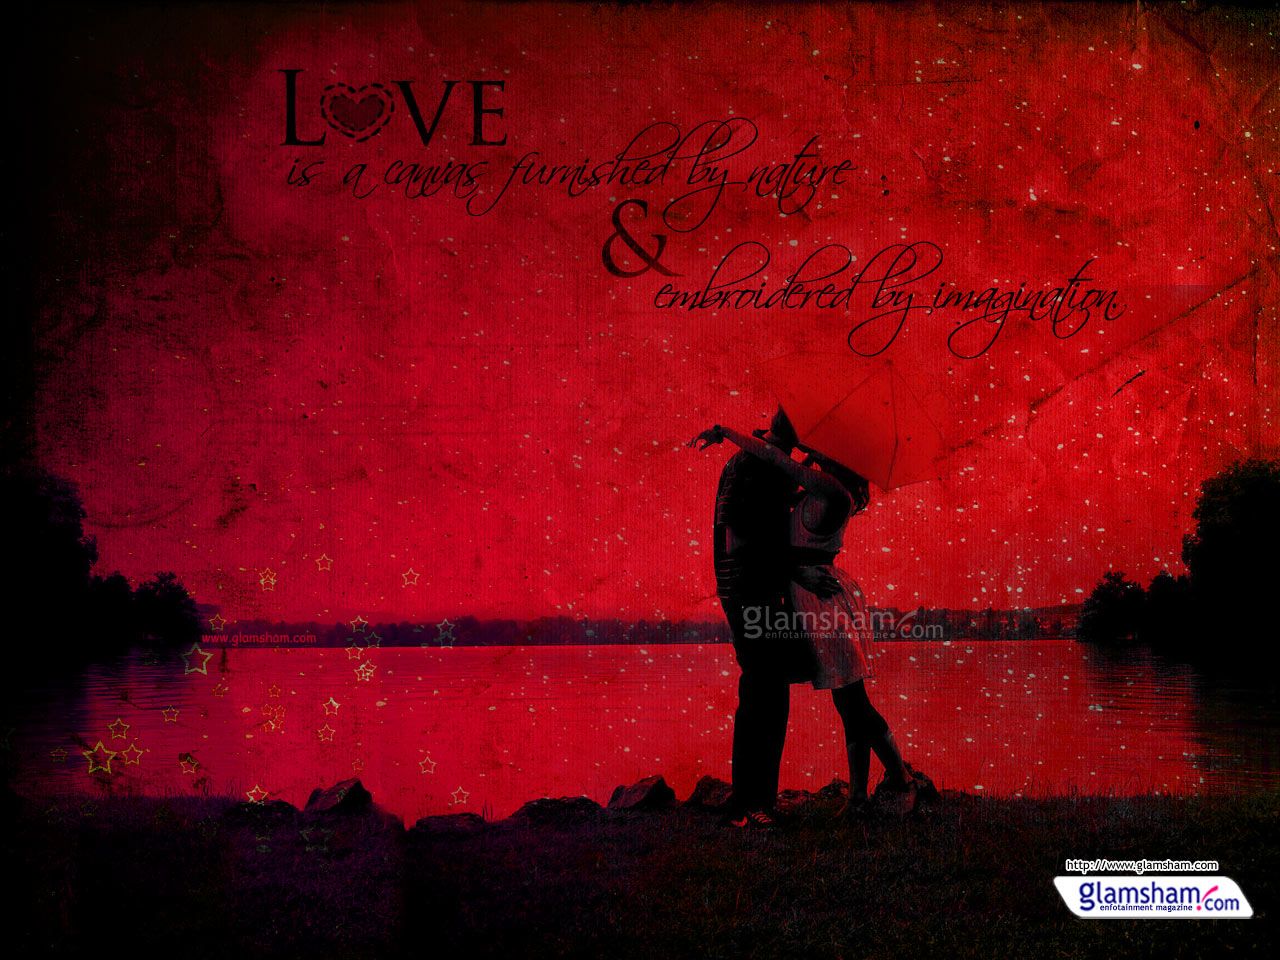 Download} Full HD Valentine's Day Wallpaper for Mobile. PC. Laptop